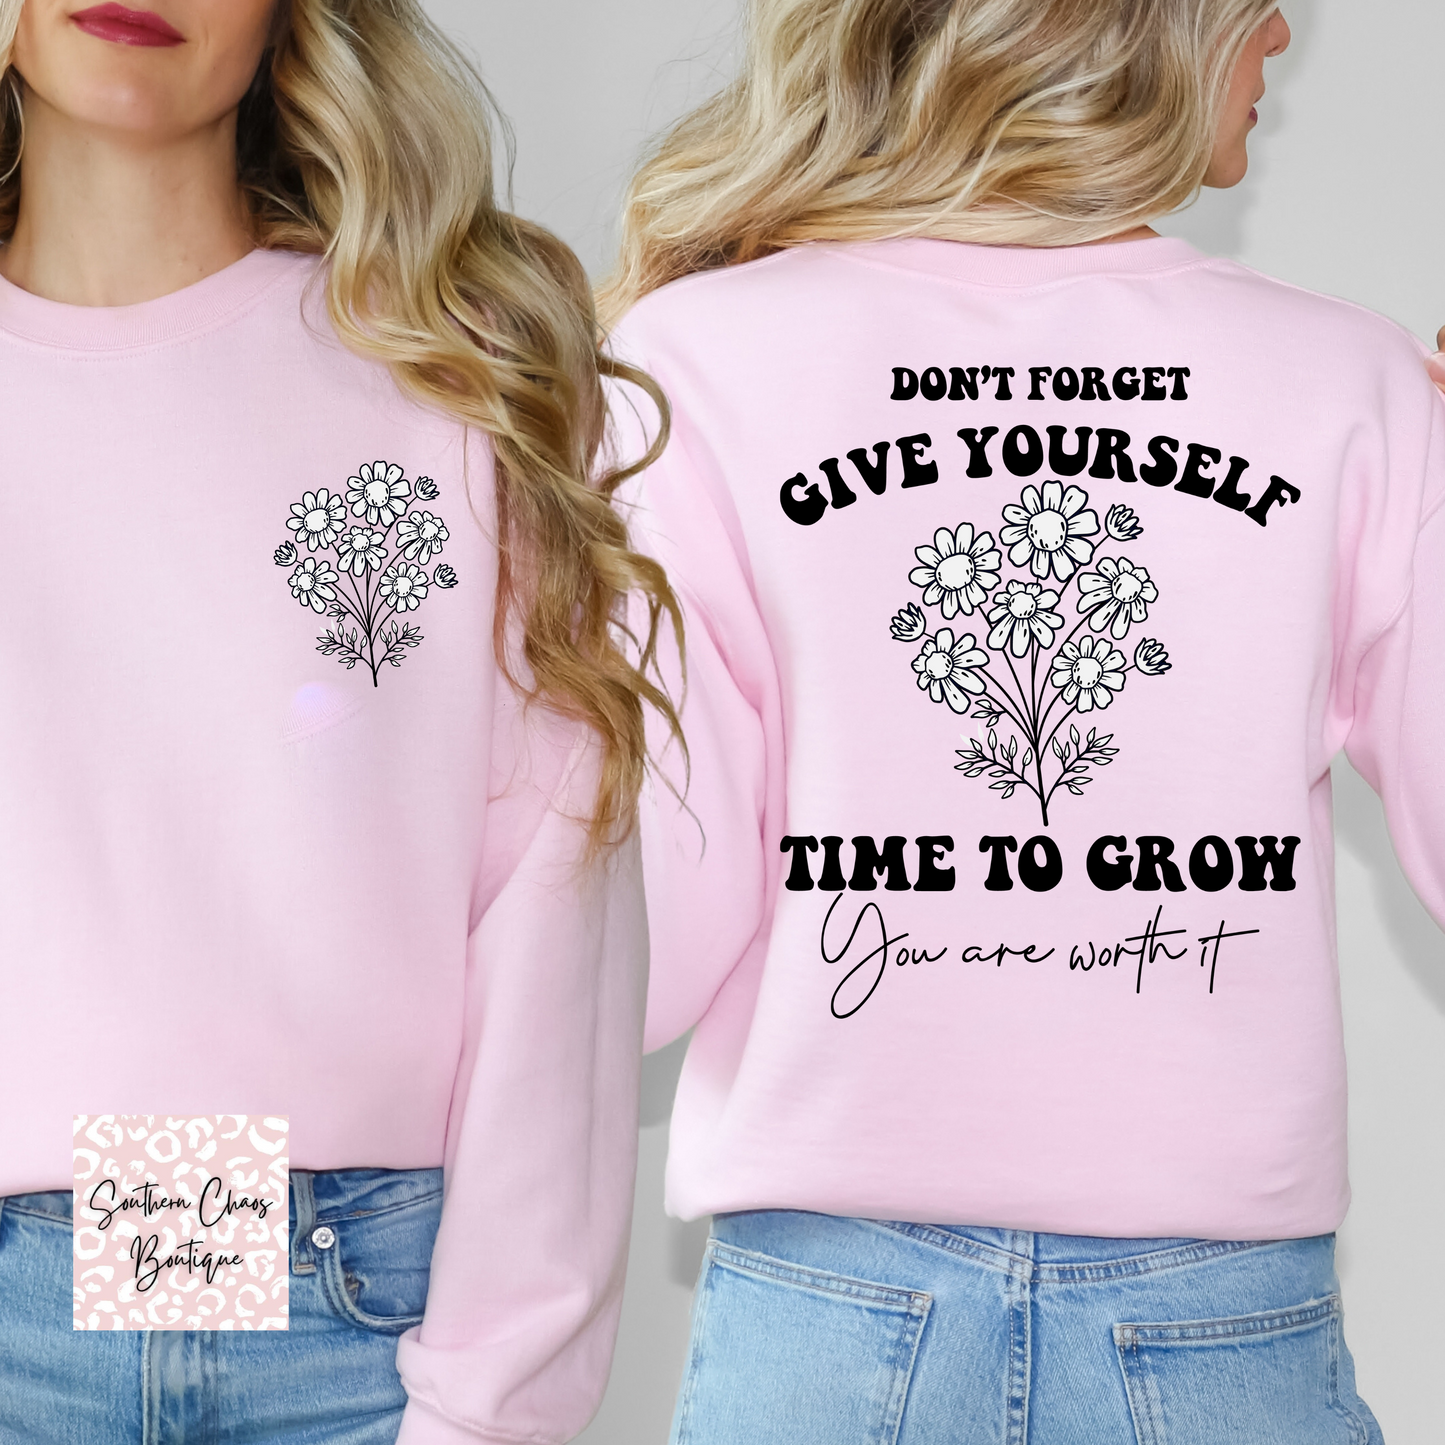 Give Yourself Time to Grow